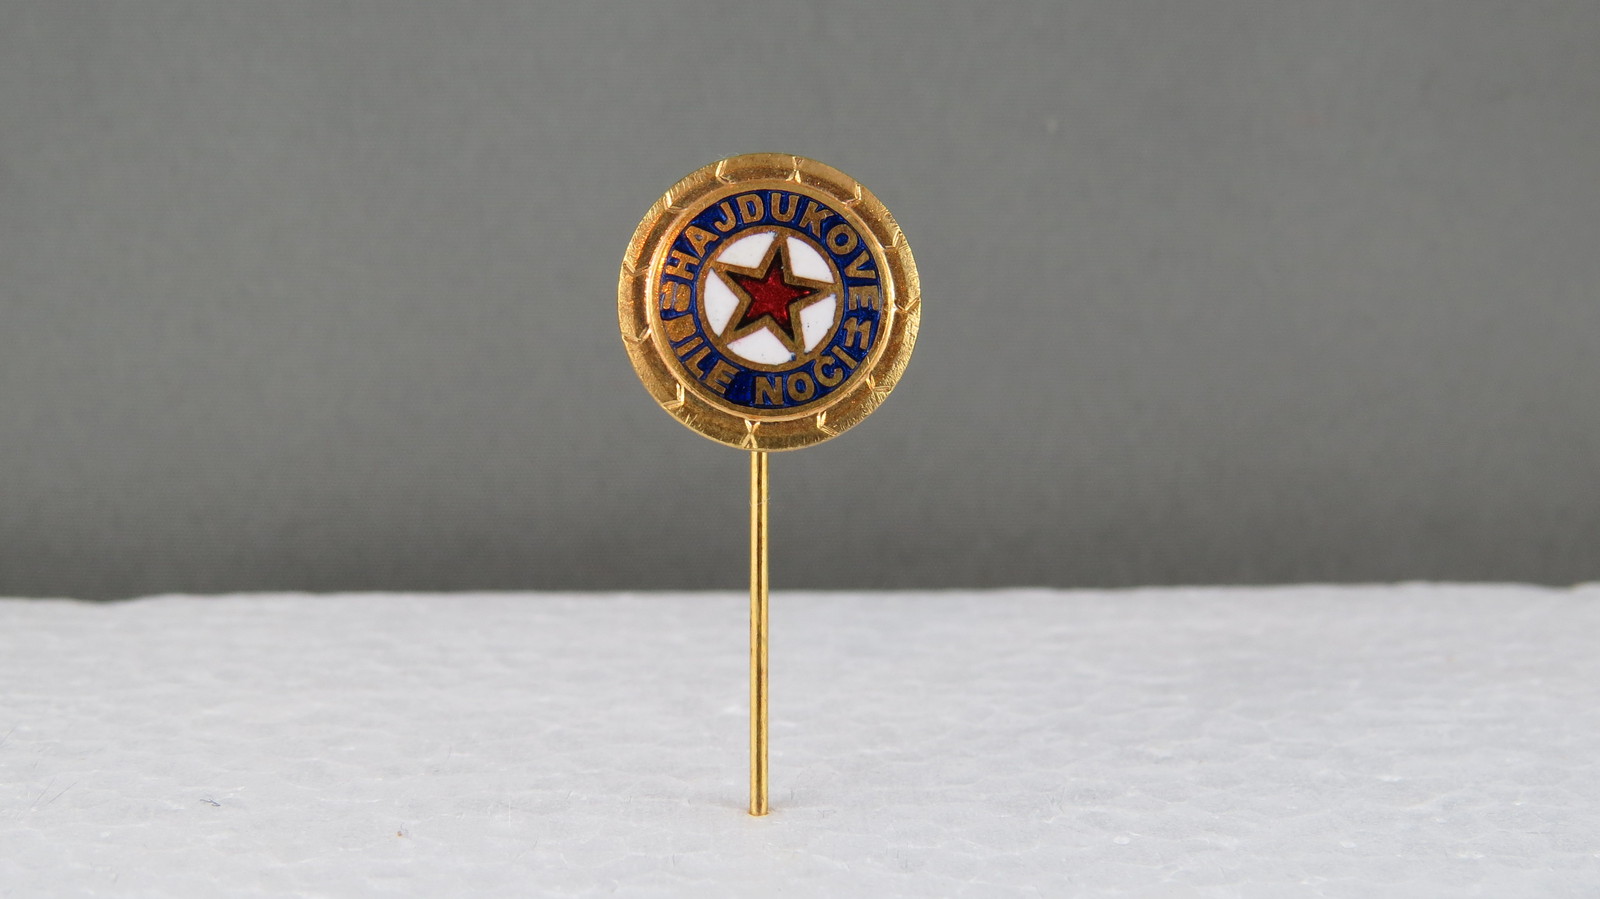 Primary image for Vintage HNK Hajduk Split Football/Soccer Club Lapel Pin -Featuring Embossed Logo